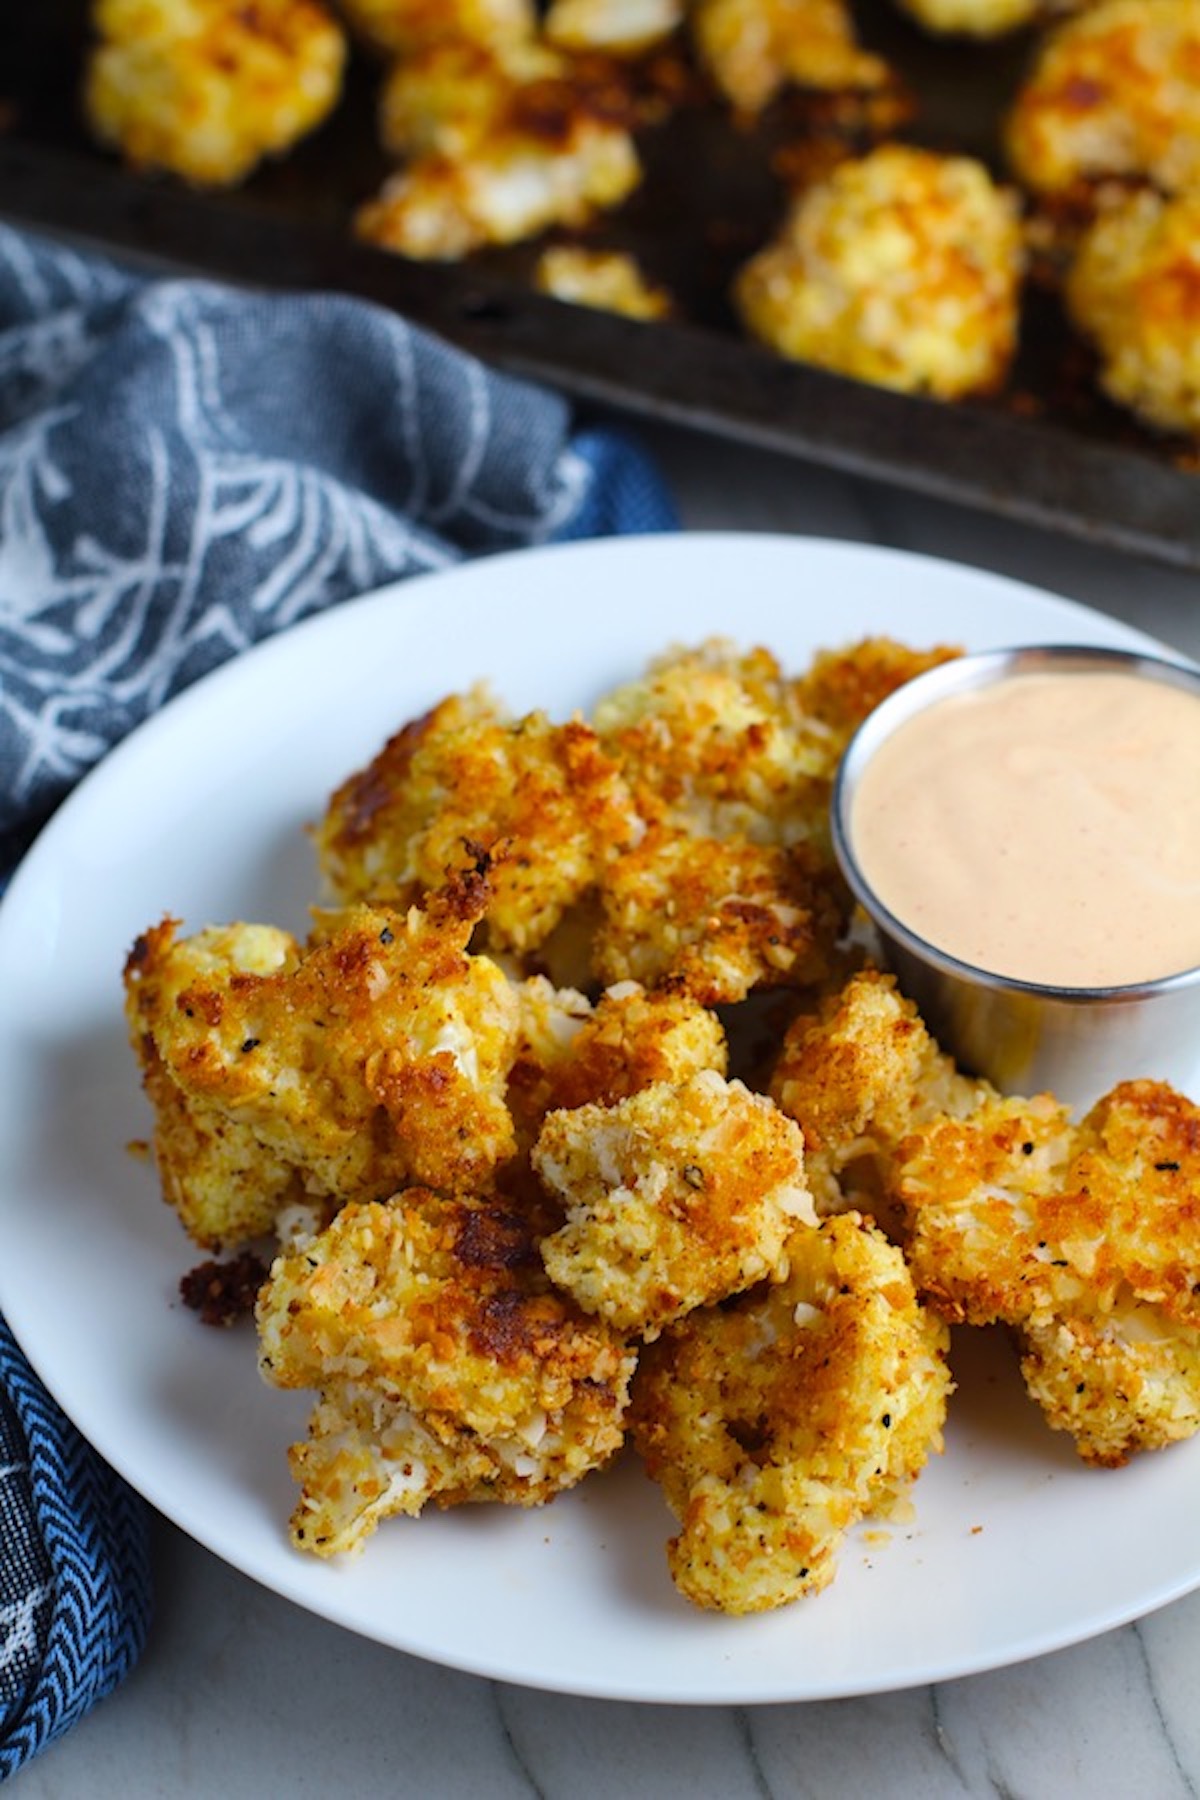 Baked Breaded Cauliflower Recipe on plate with Sriracha Mayo dipping sauce.  They have a slightly sweet and salty crunch outside from the shredded coconut and panko mixture.  The inside is soft and creamy.  Dip in the Sriracha Mayo. 